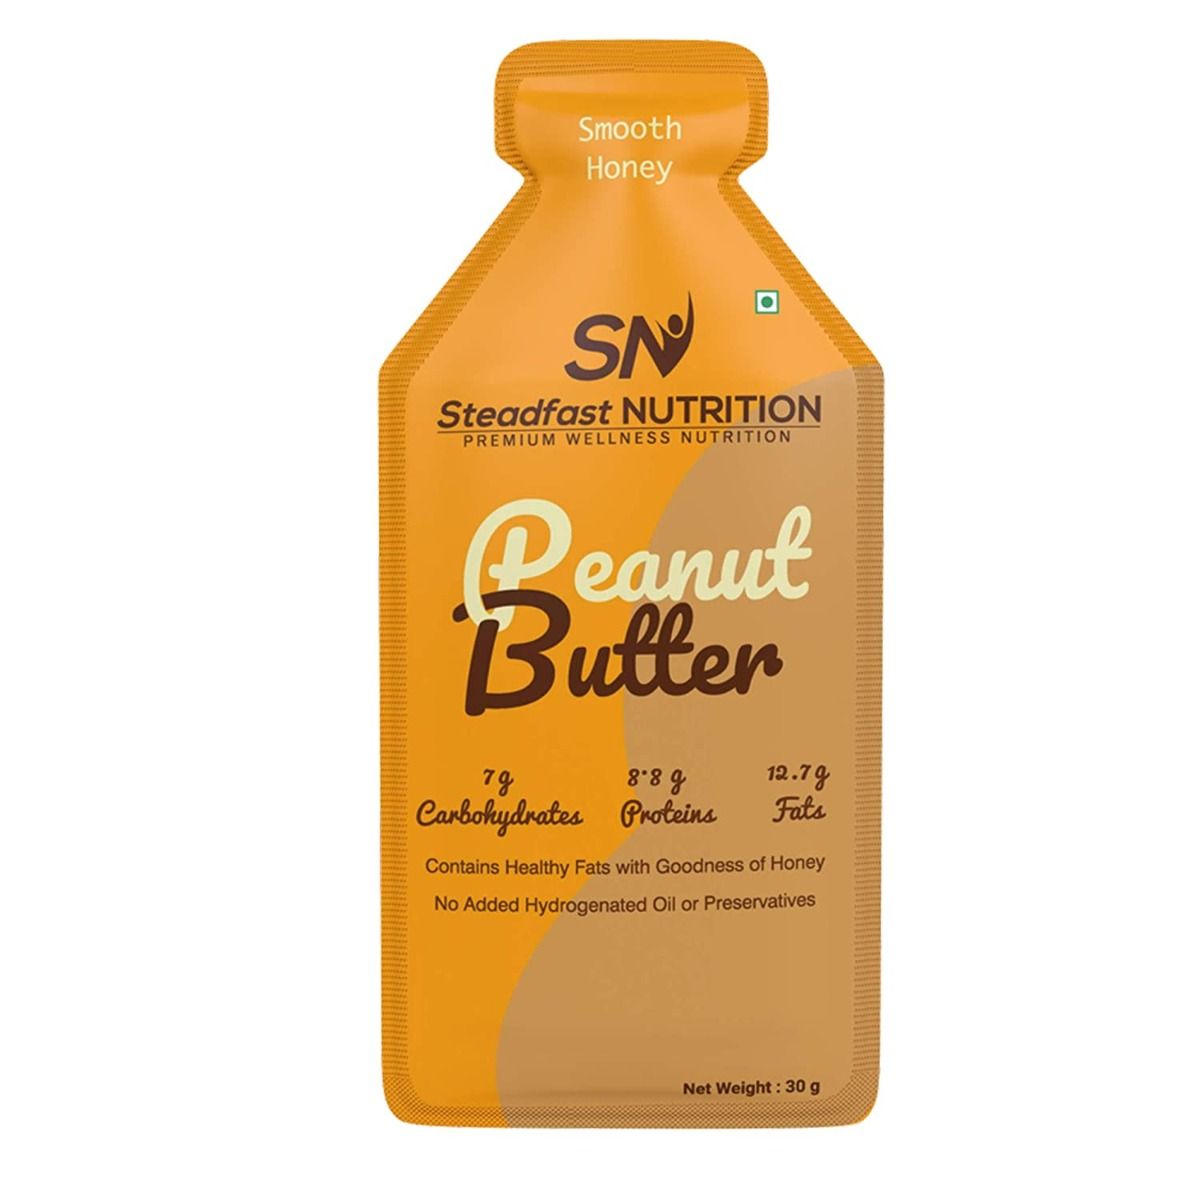 Steadfast Nutrition Peanut Butter, 30 gm, Pack of 1 